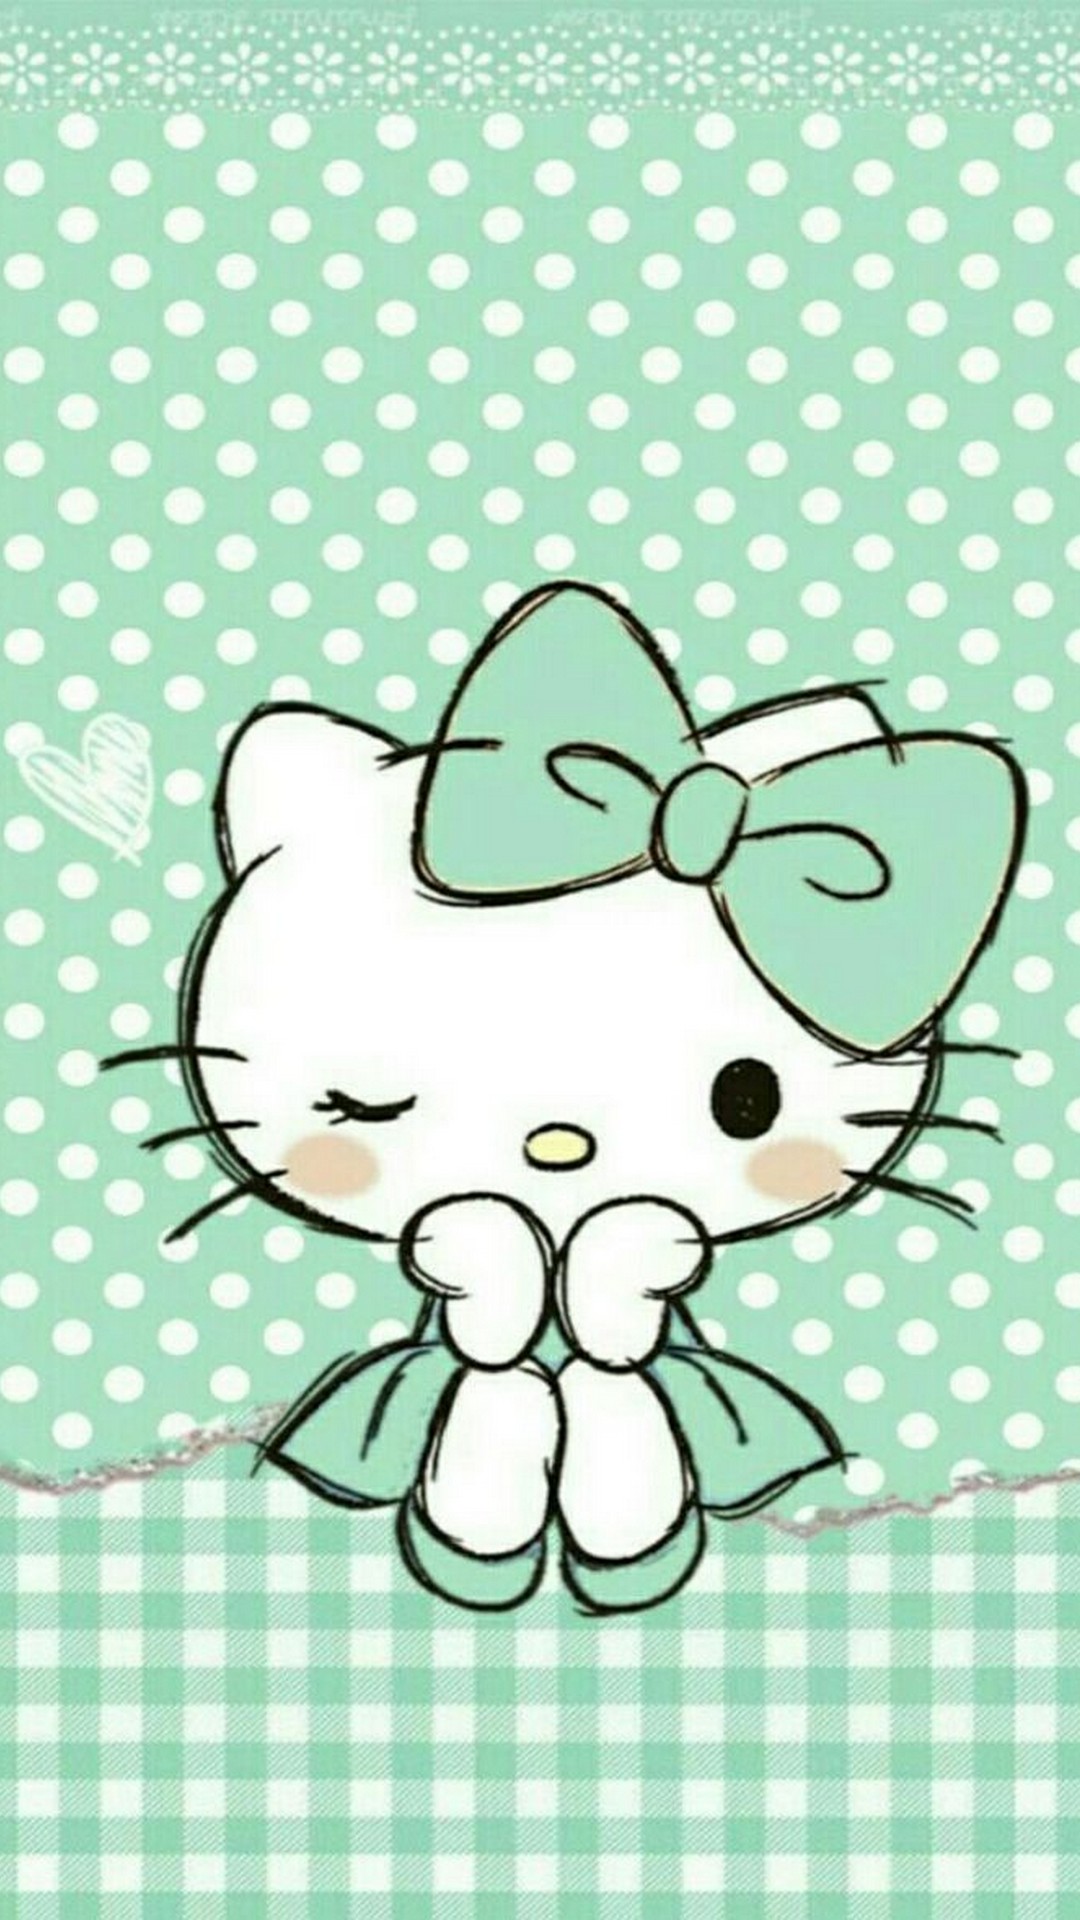 Hello Kitty Wallpaper For Android with image resolution 1080x1920 pixel. You can make this wallpaper for your Android backgrounds, Tablet, Smartphones Screensavers and Mobile Phone Lock Screen